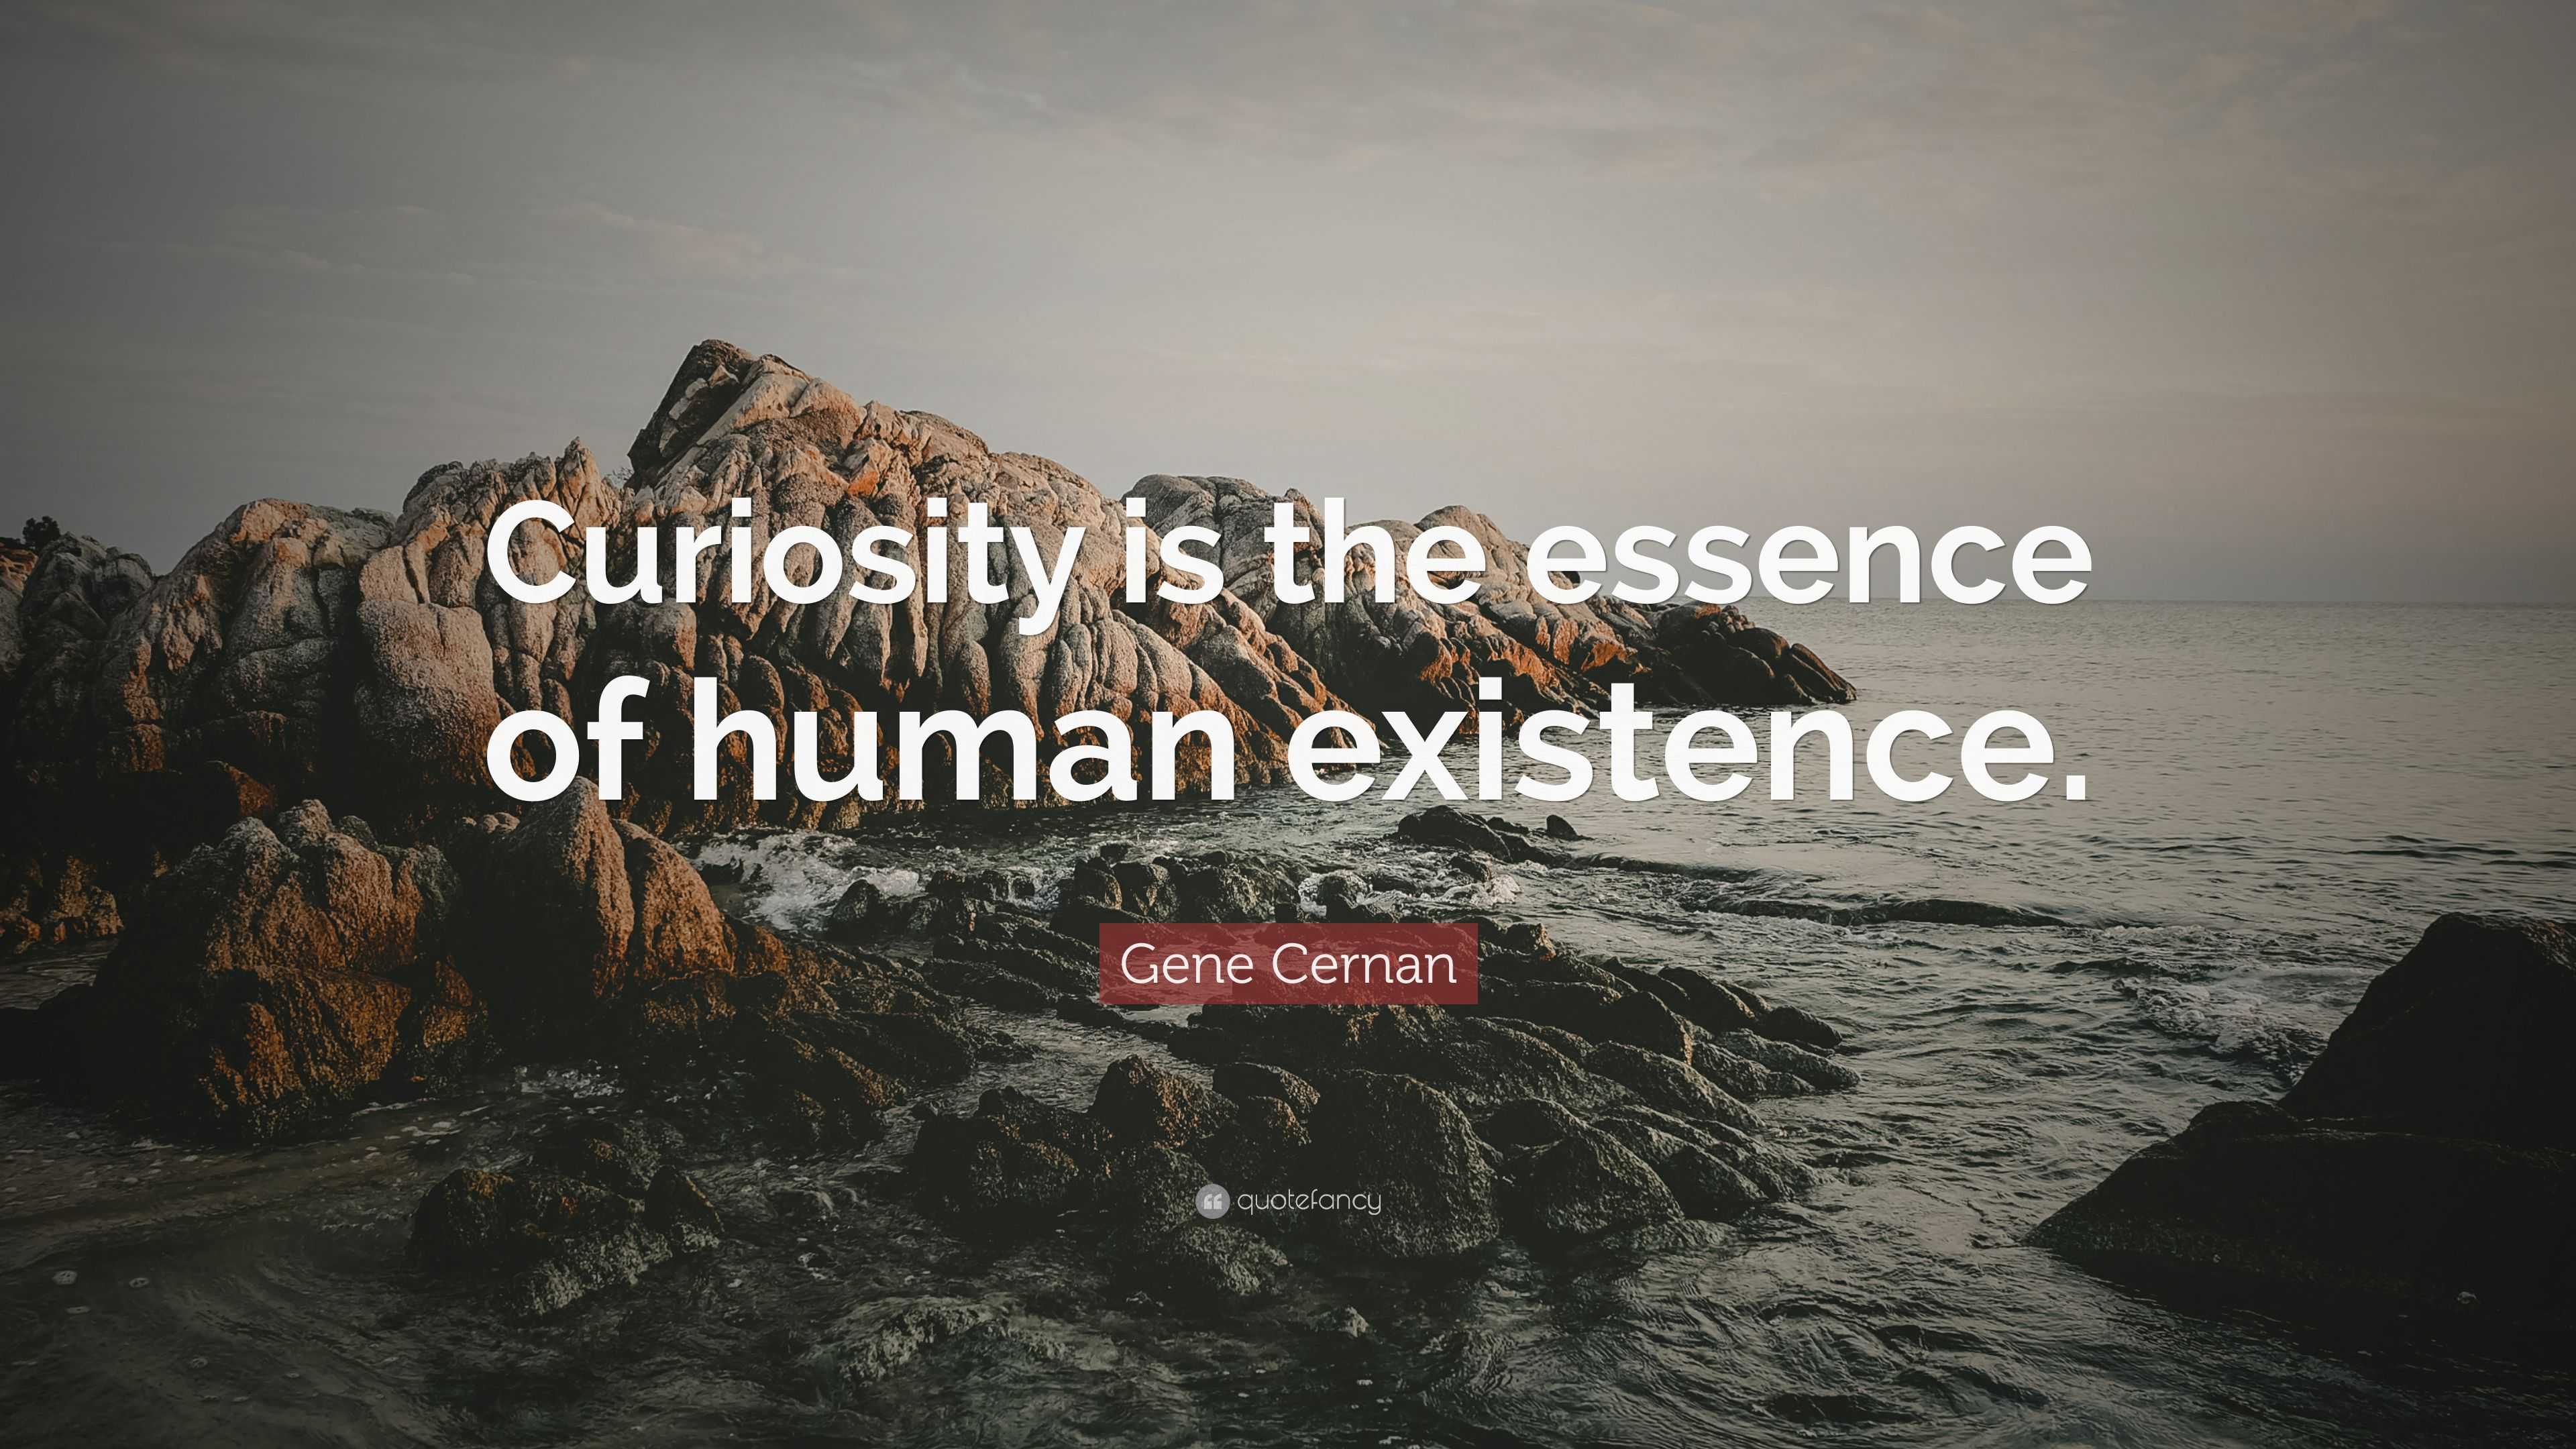 Gene Cernan Quote: “Curiosity is the essence of human existence.”